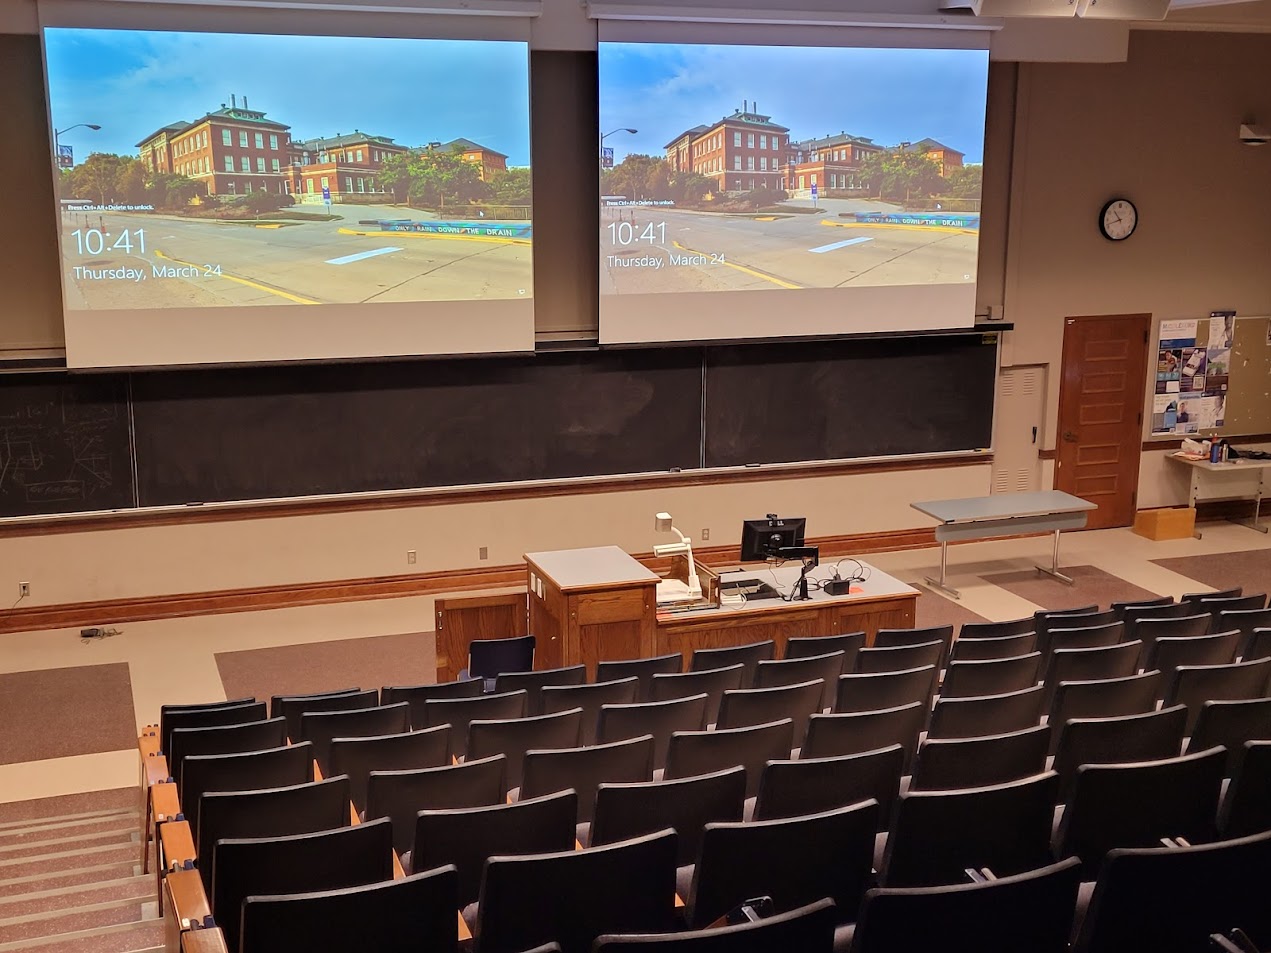 A view of the classroom with Theatre Auditorium seating, chalkboard, and instructor table in front